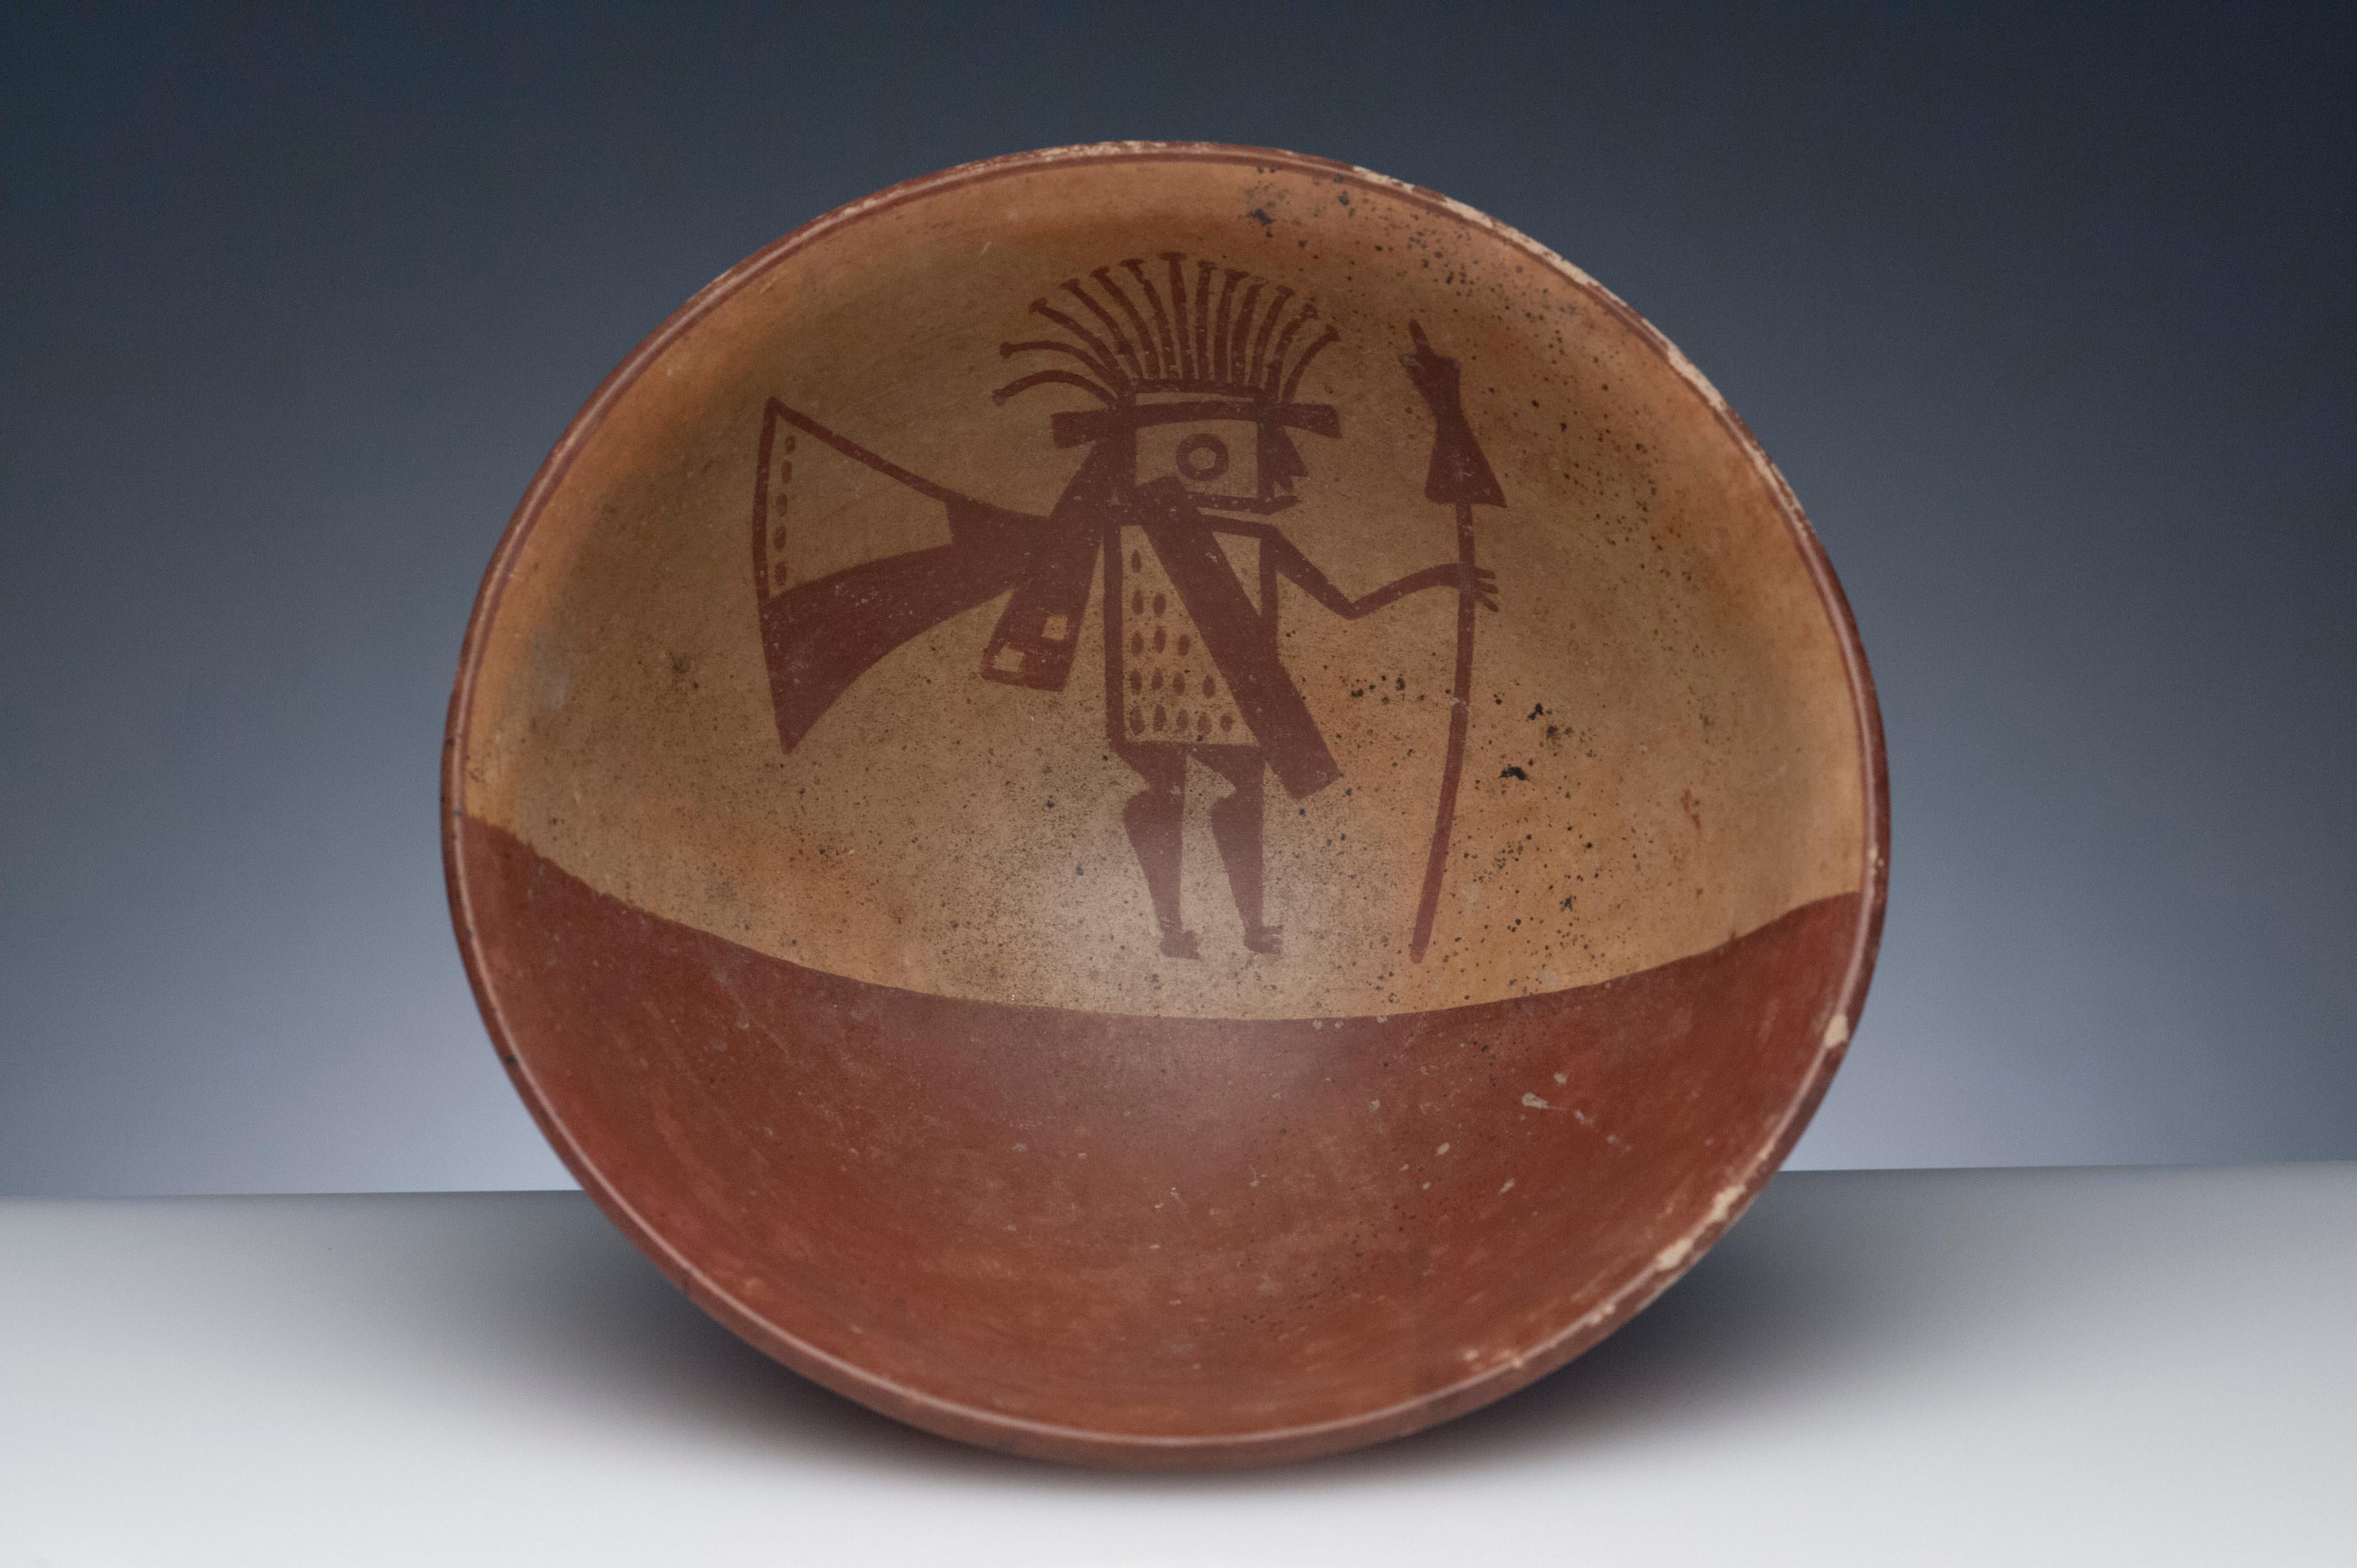 Fine Pre-Columbian Narino footed bowl from Columbia, circa 850 to 1500. Desirable polychrome bowl with vibrant color and rare warrior image.